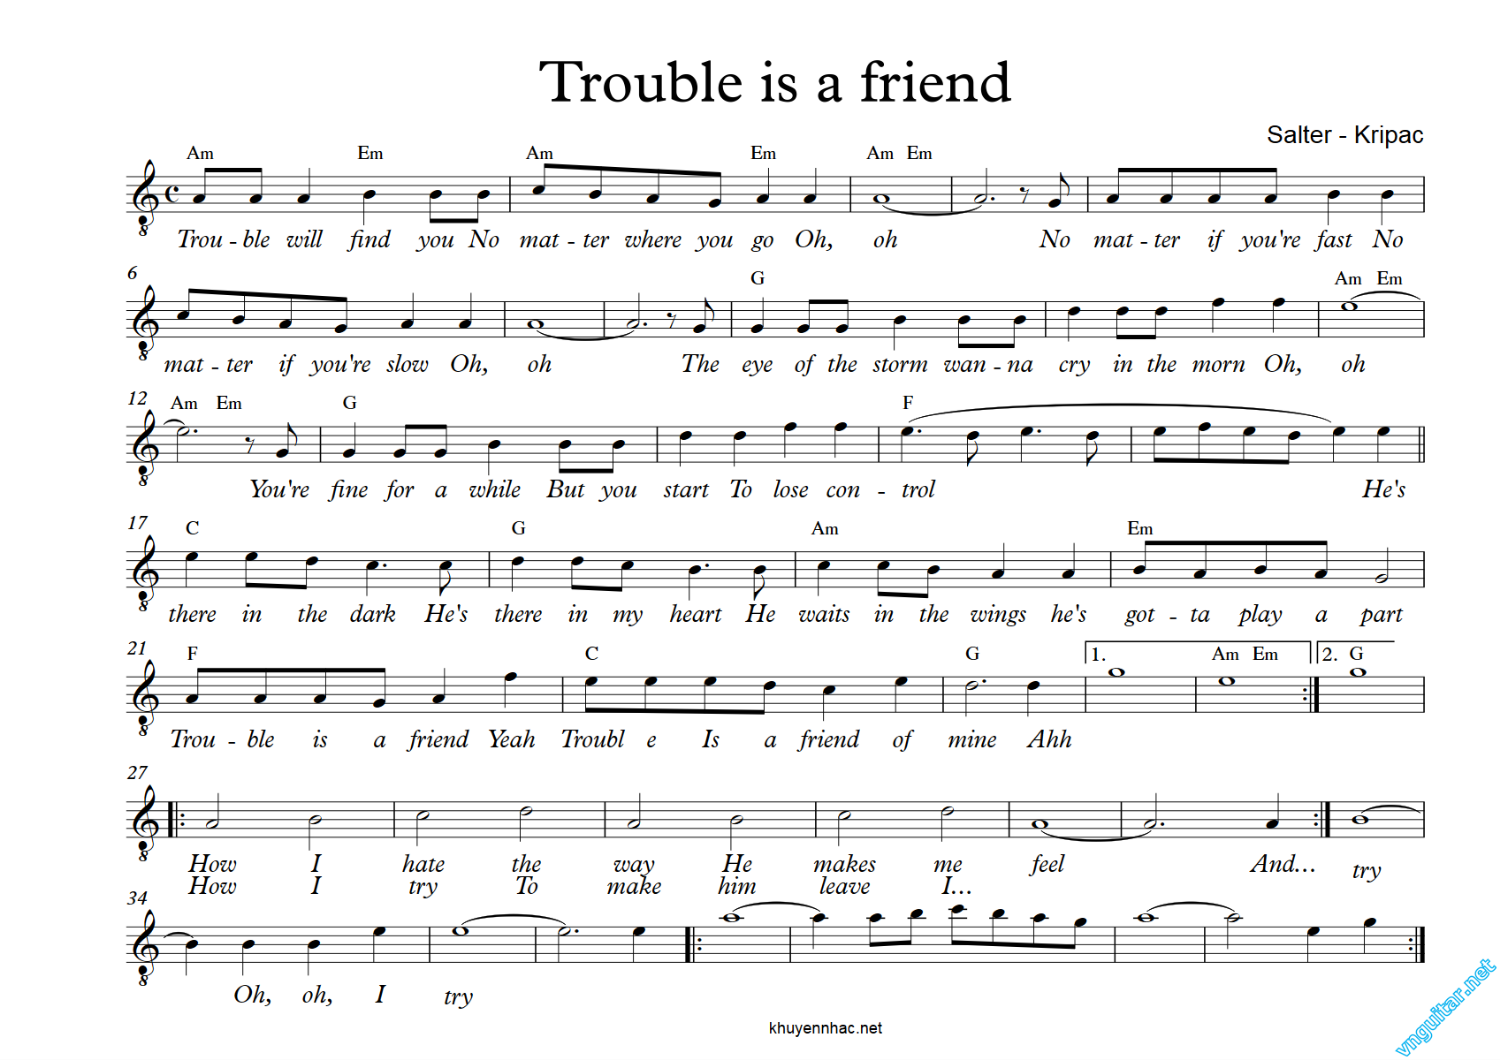 Trouble is a friend sheet music notes